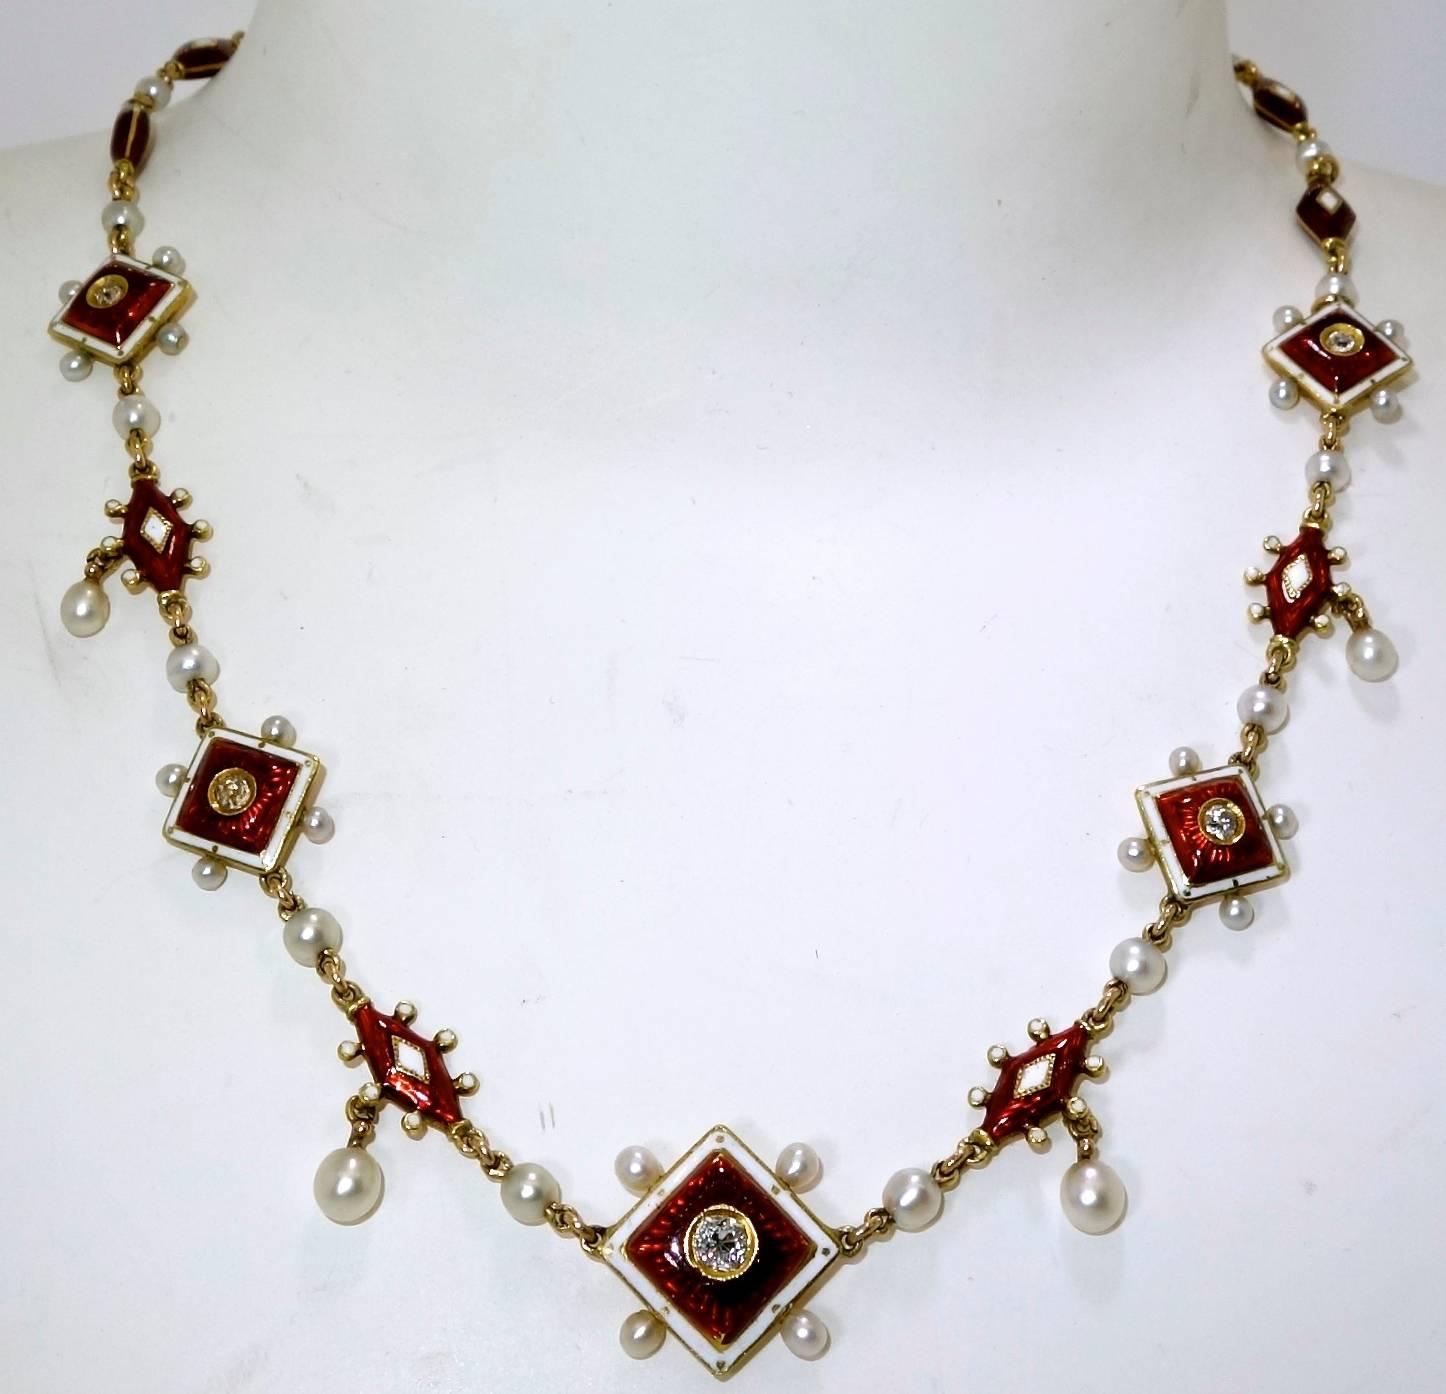 Antique guillochee red and white opaque enamel charming necklace with old cut diamonds and natural pearls.  There is a flip up/down bale so that a pendant or drop can be suspended from the center piece.  15.25 inches, this necklace is meant to be